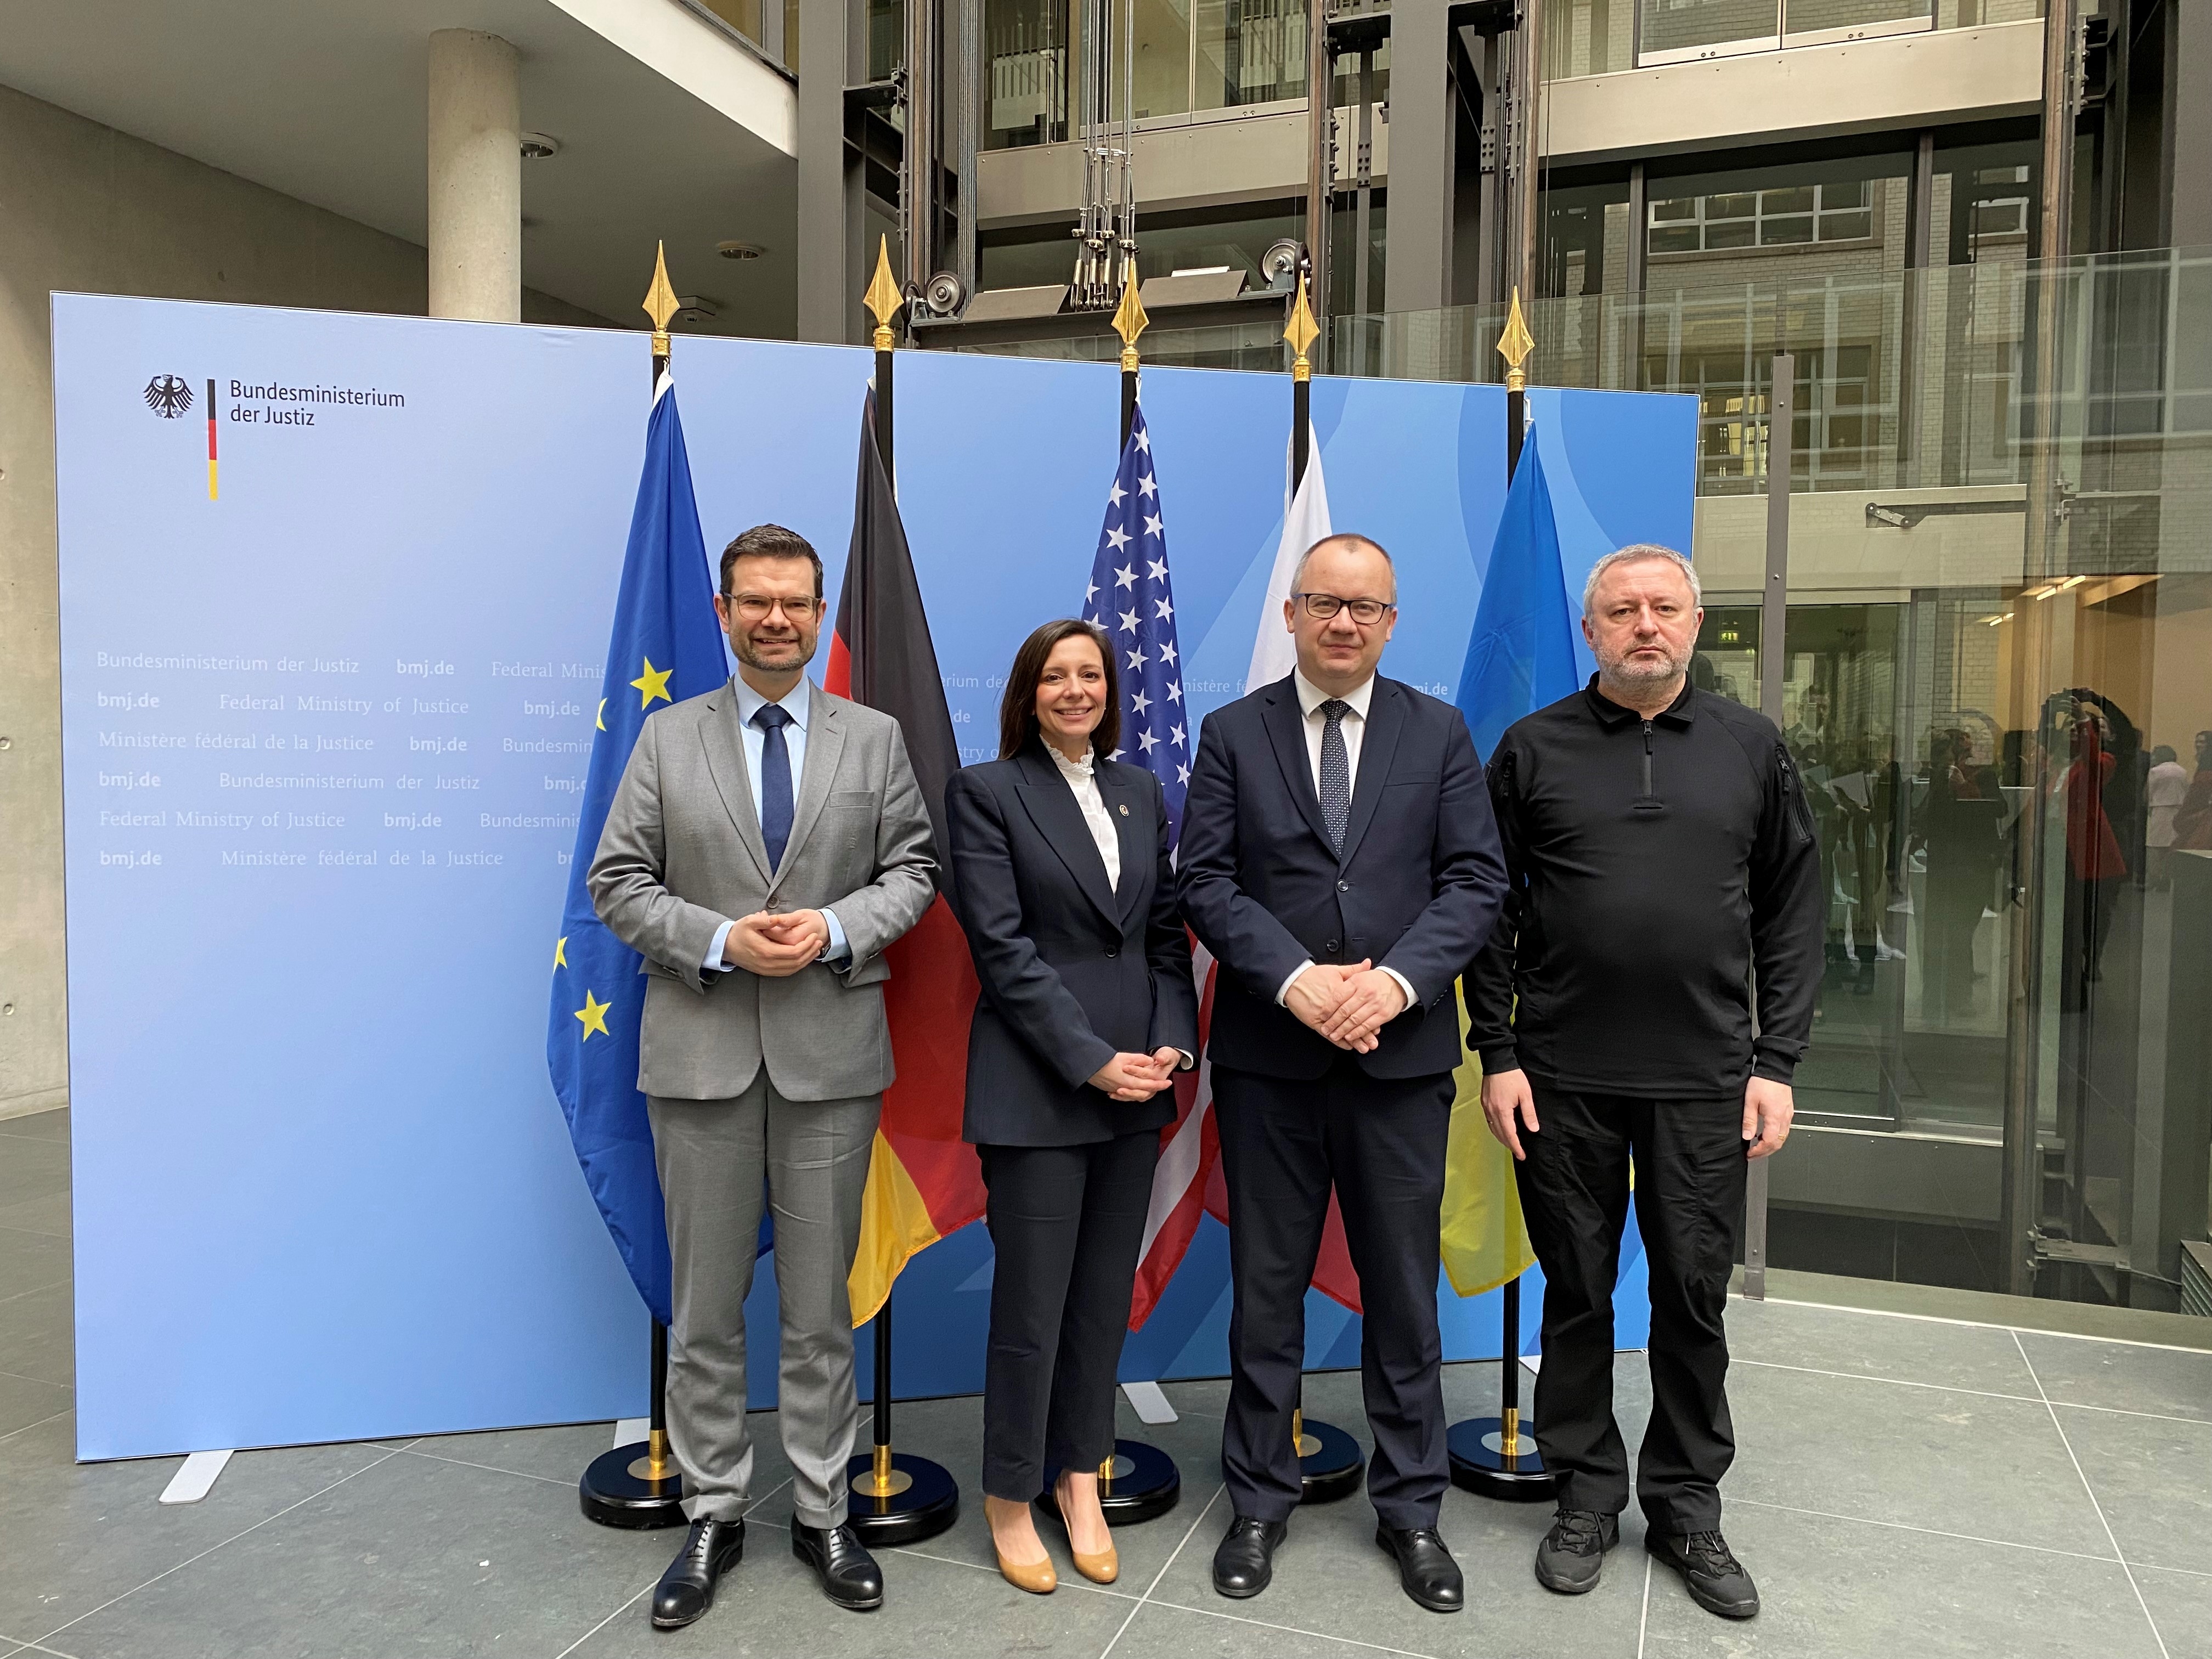 From left to right: German Minister of Justice Buschmann, A/AAG Argentieri, Polish Minister of Justice Bodnar, and Ukrainian Prosecutor General Kostin.